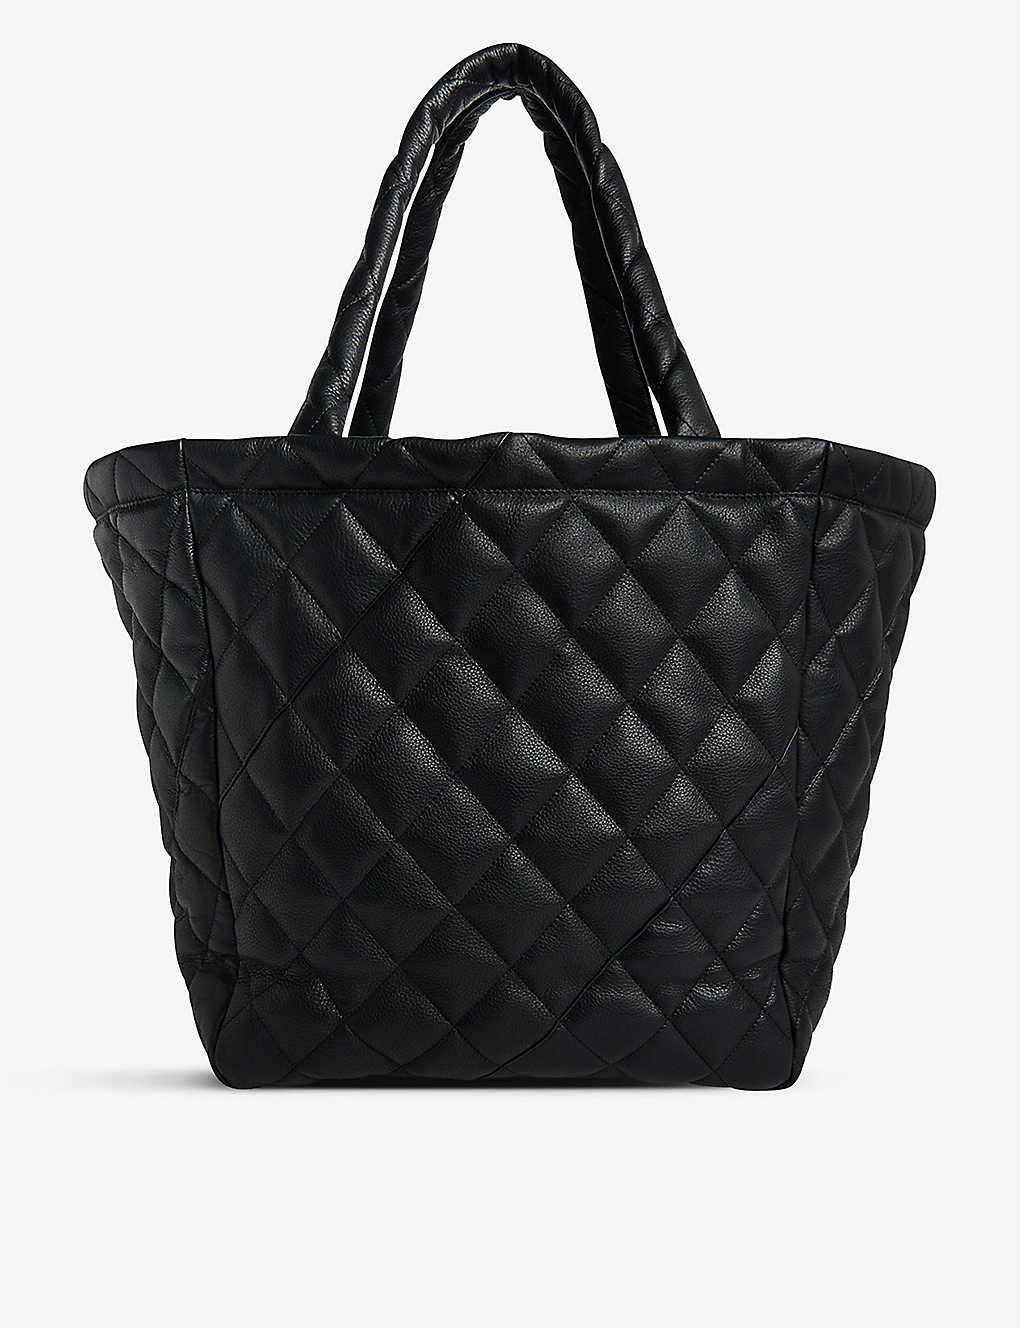 Whistles Lyle Quilted Leather Tote Bag in Black | Lyst